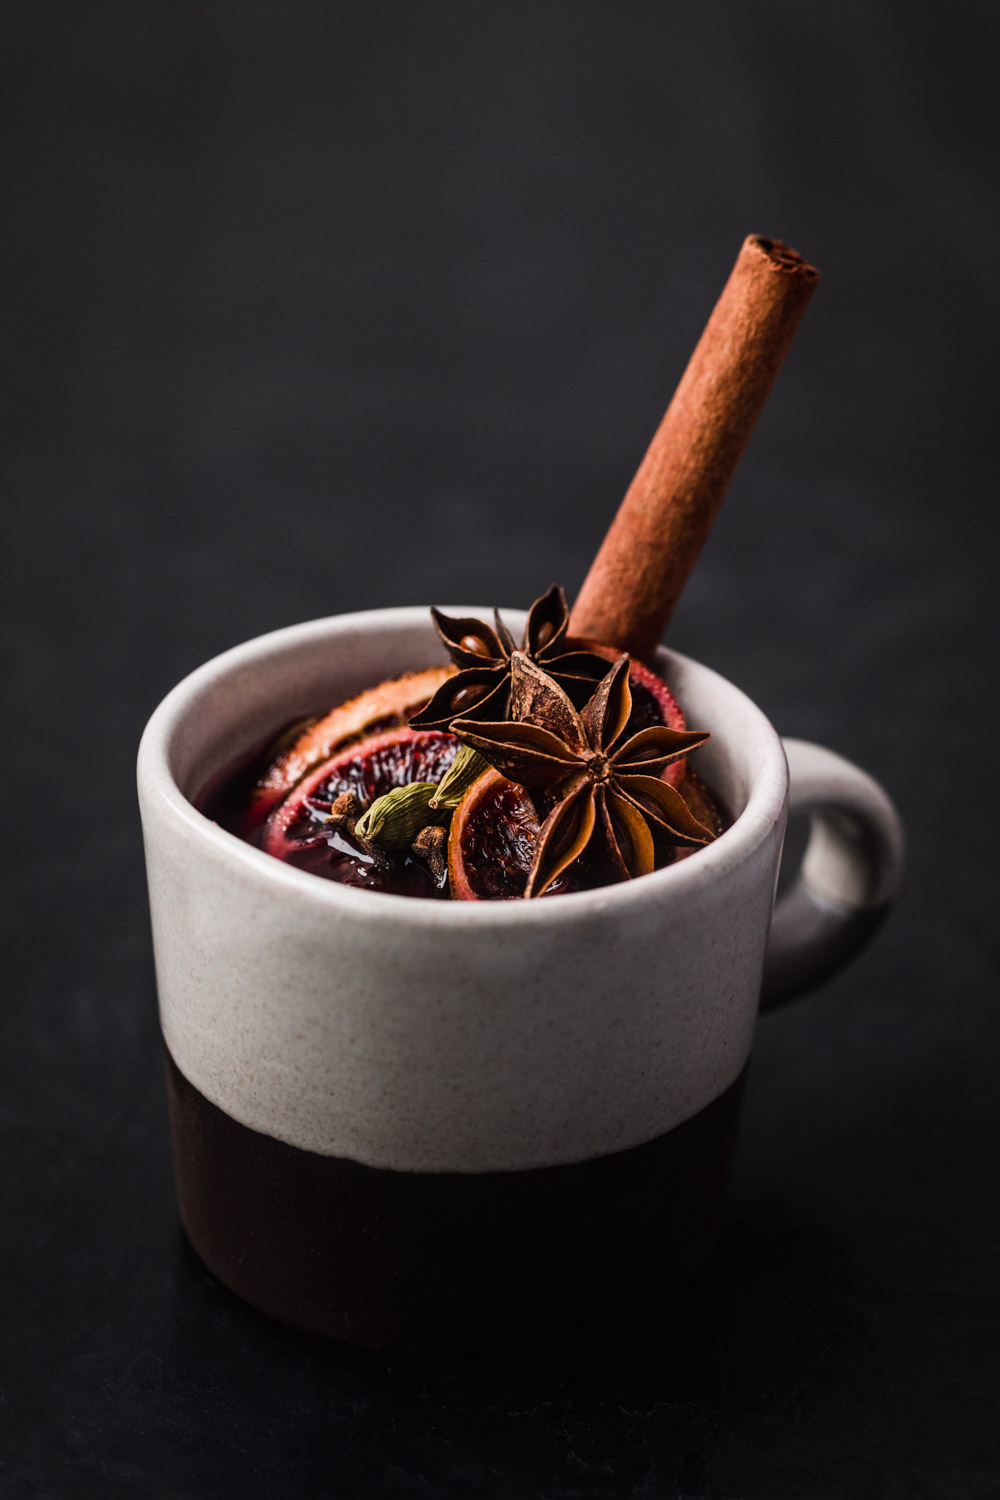 Side angle shot of spiced wine with a few star anise, cardamom pods, blood orange and cloves.